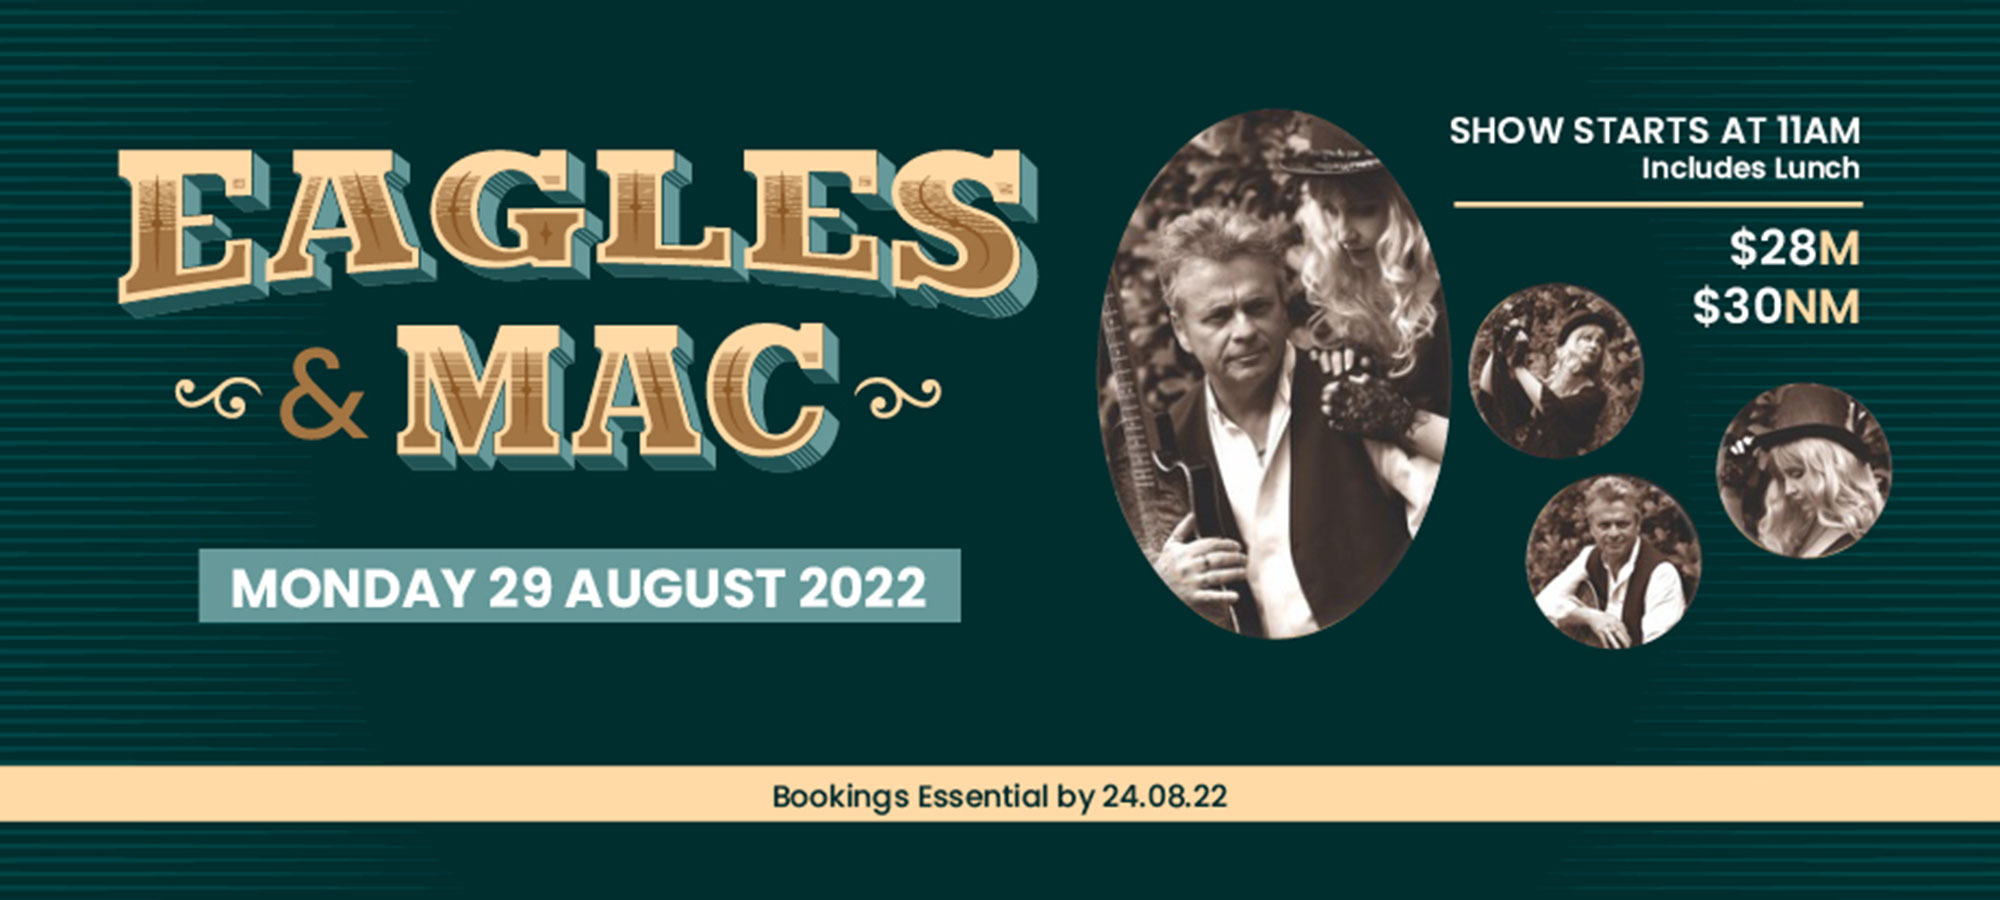 Eagles and Mac Show